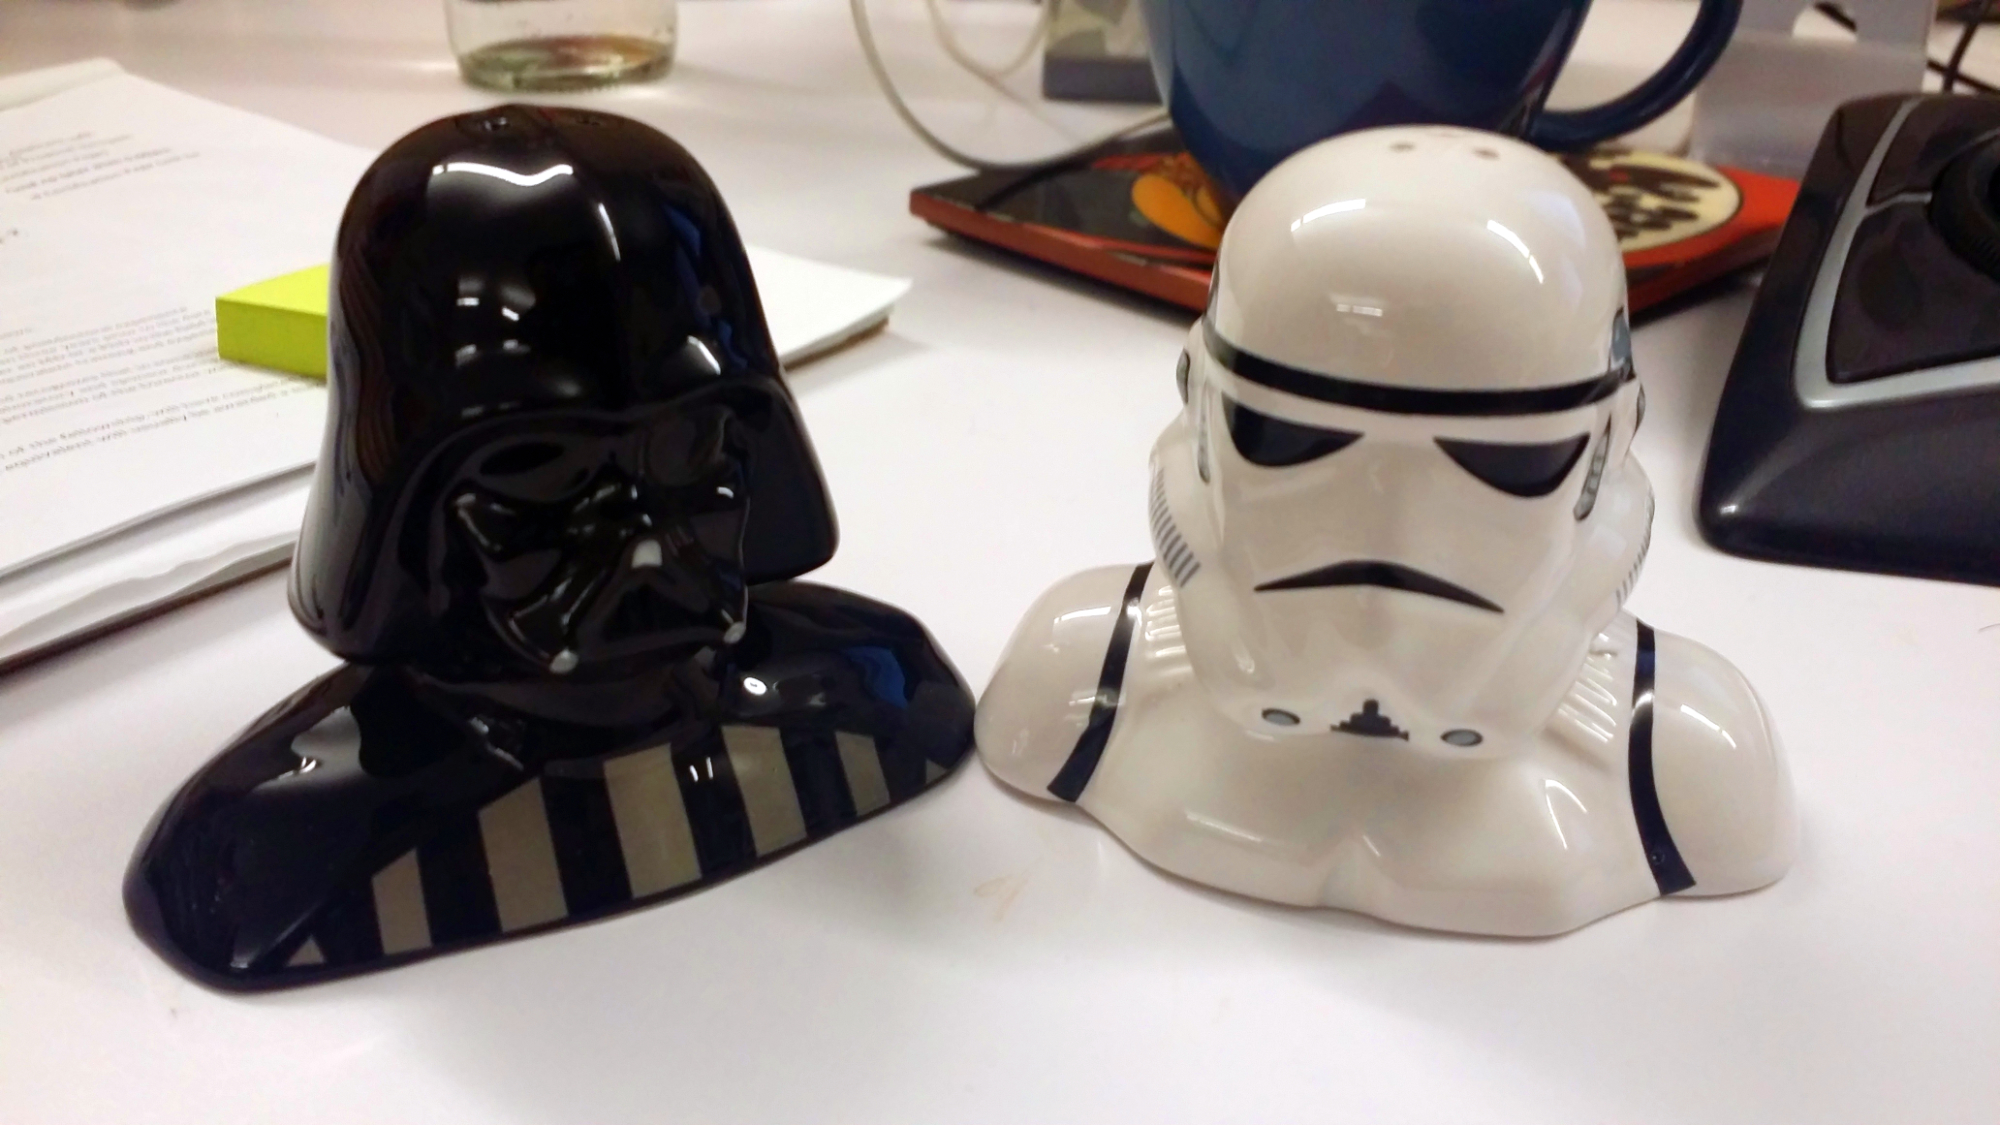 Star Wars Salt And Pepper Shakers